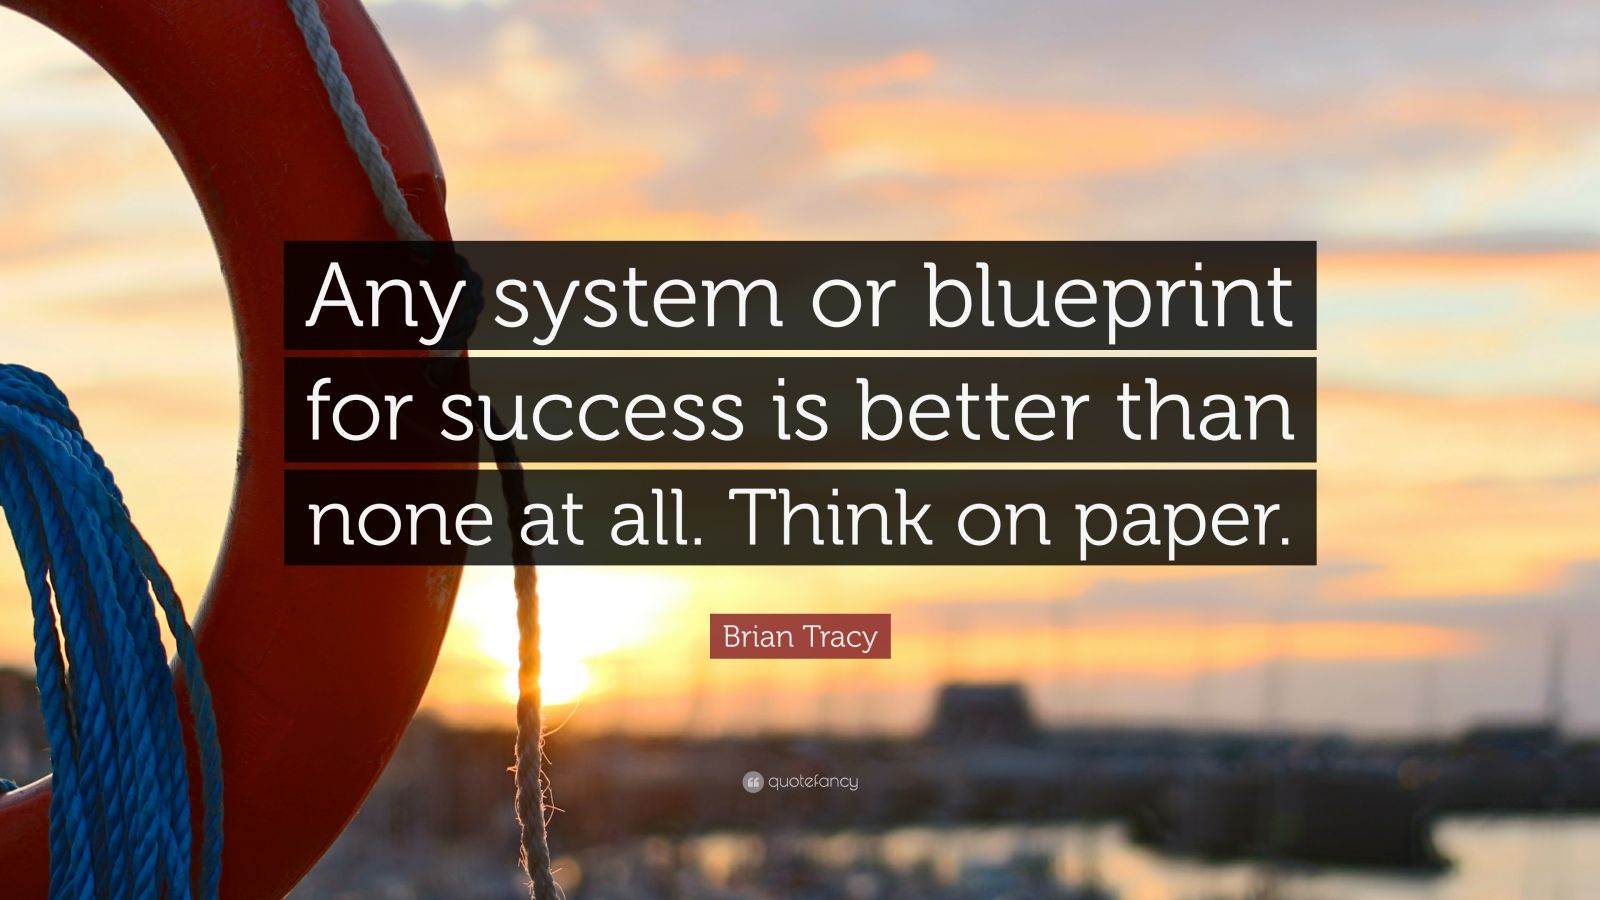 Brian Tracy Quote: “Any system or blueprint for success is better than none  at all. Think on paper.”